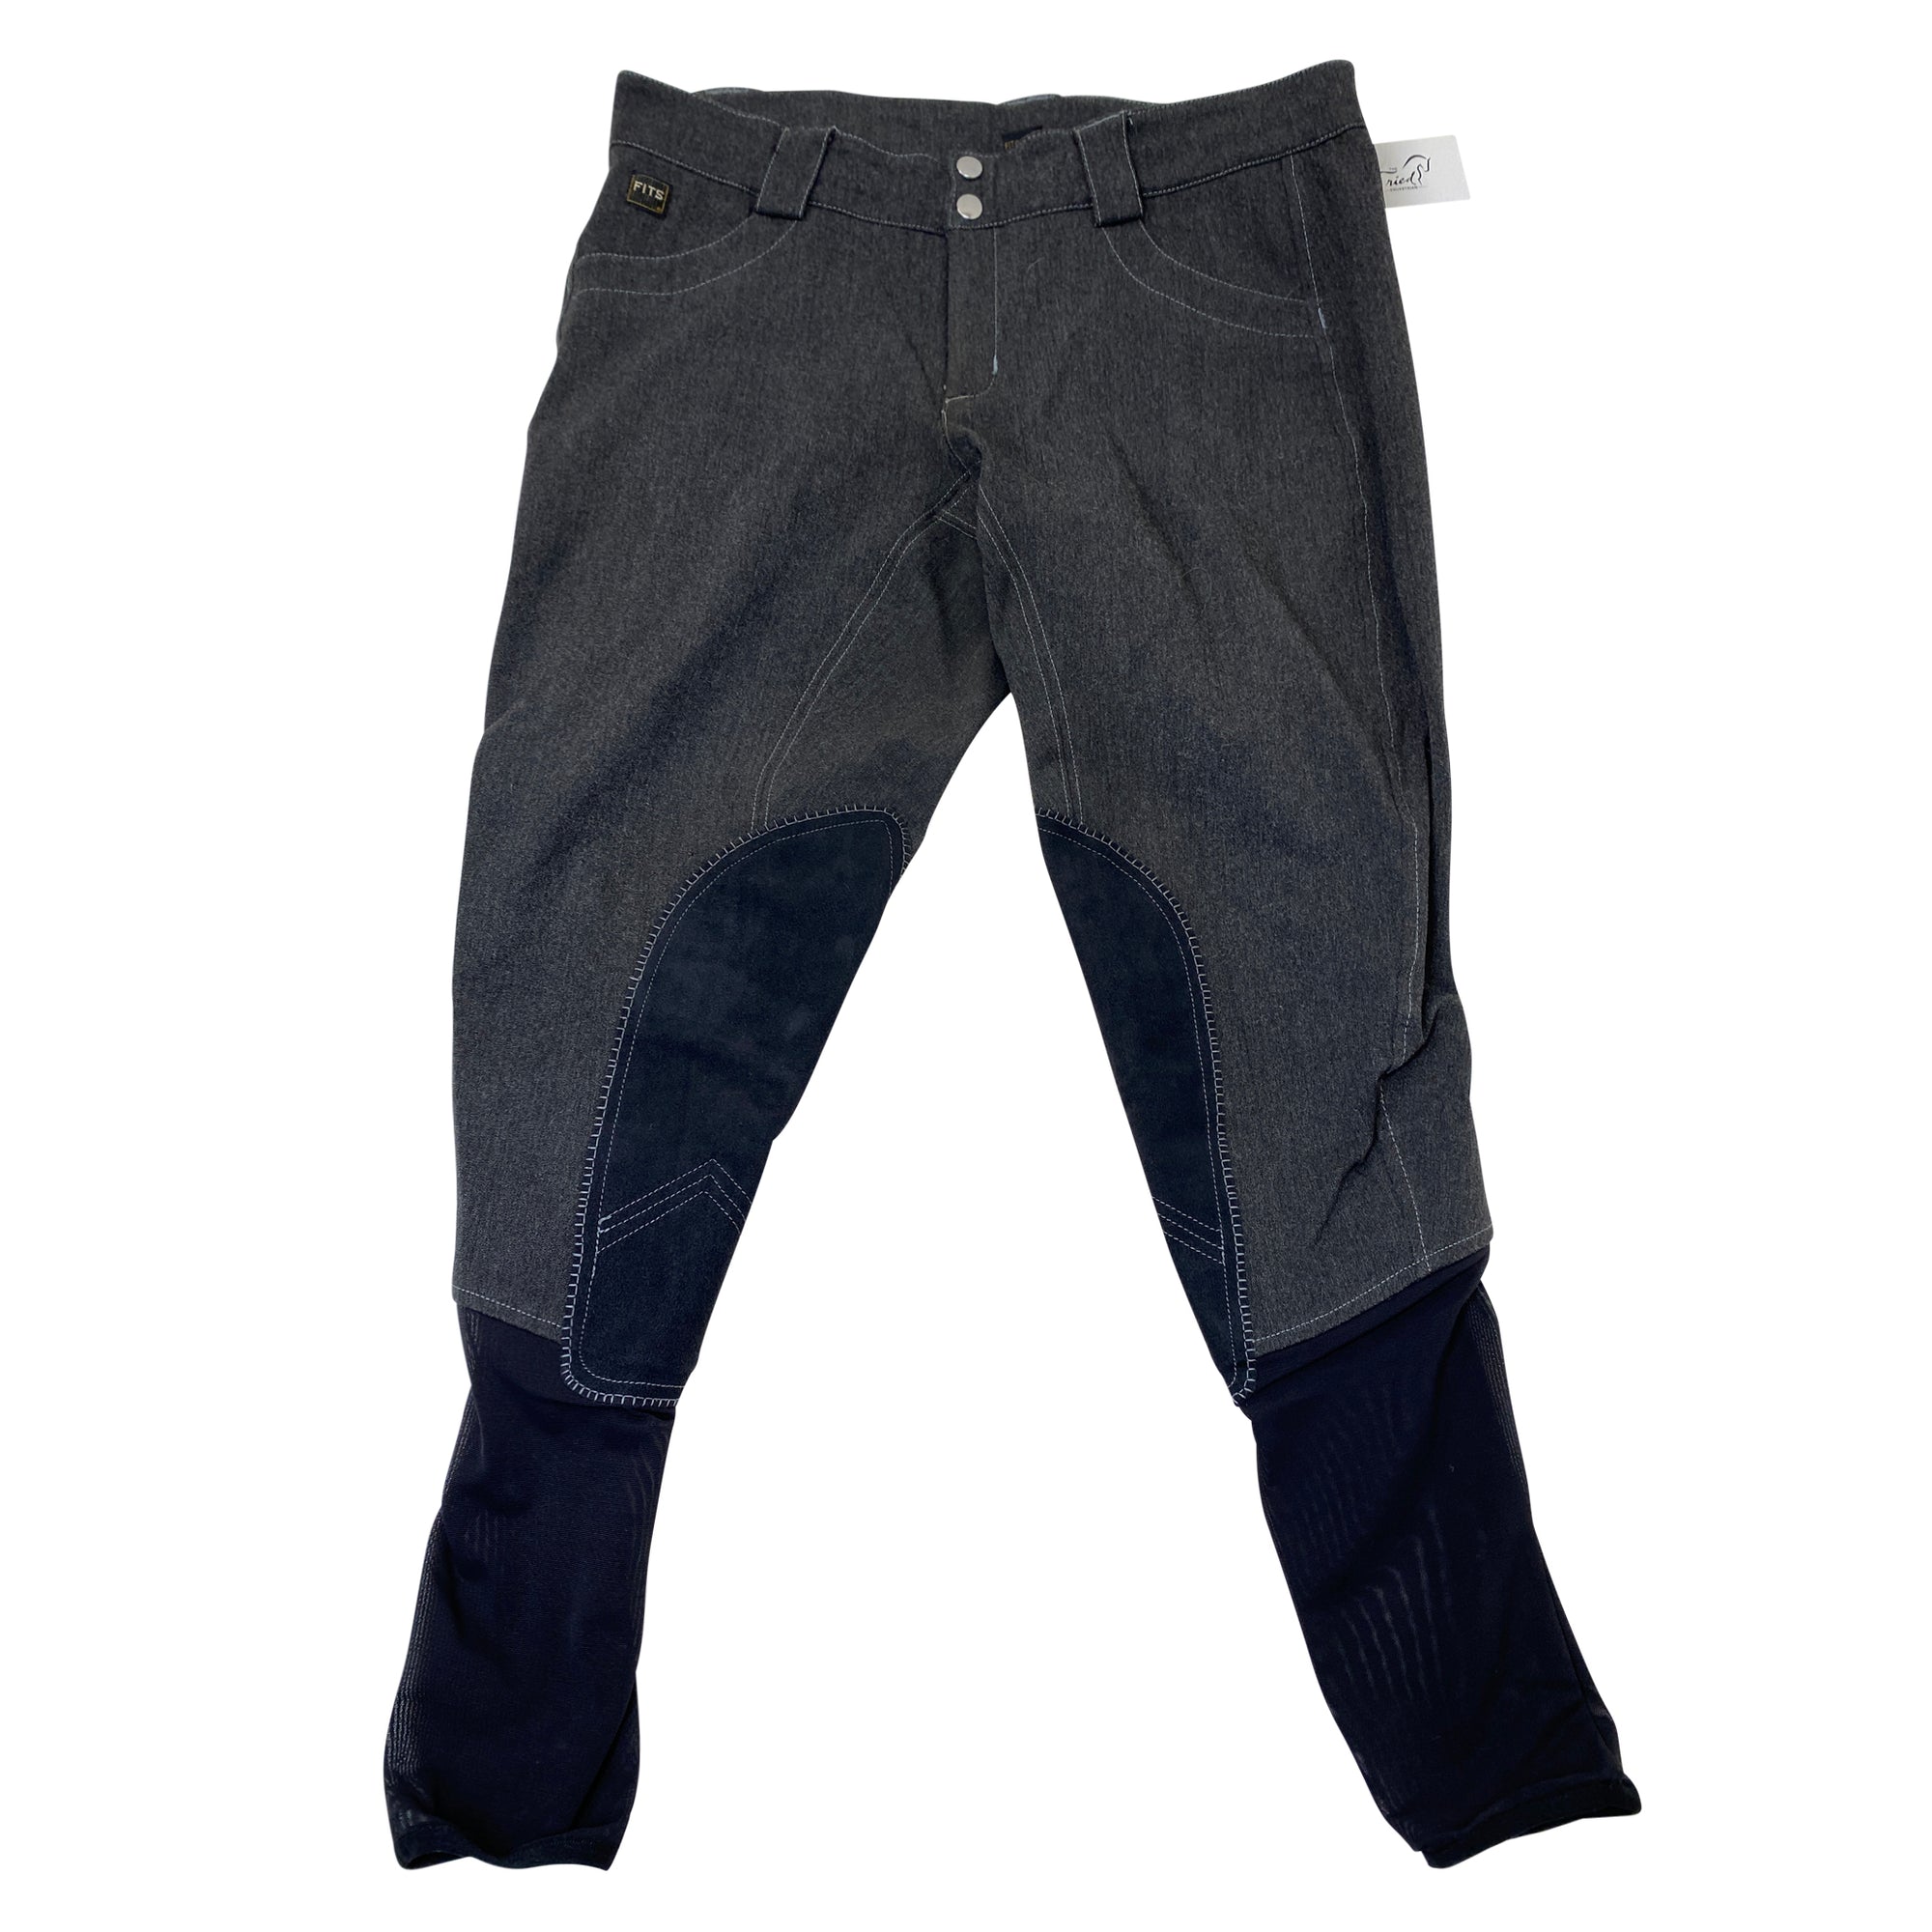 FITS Knee Patch Breeches in Charcoal 